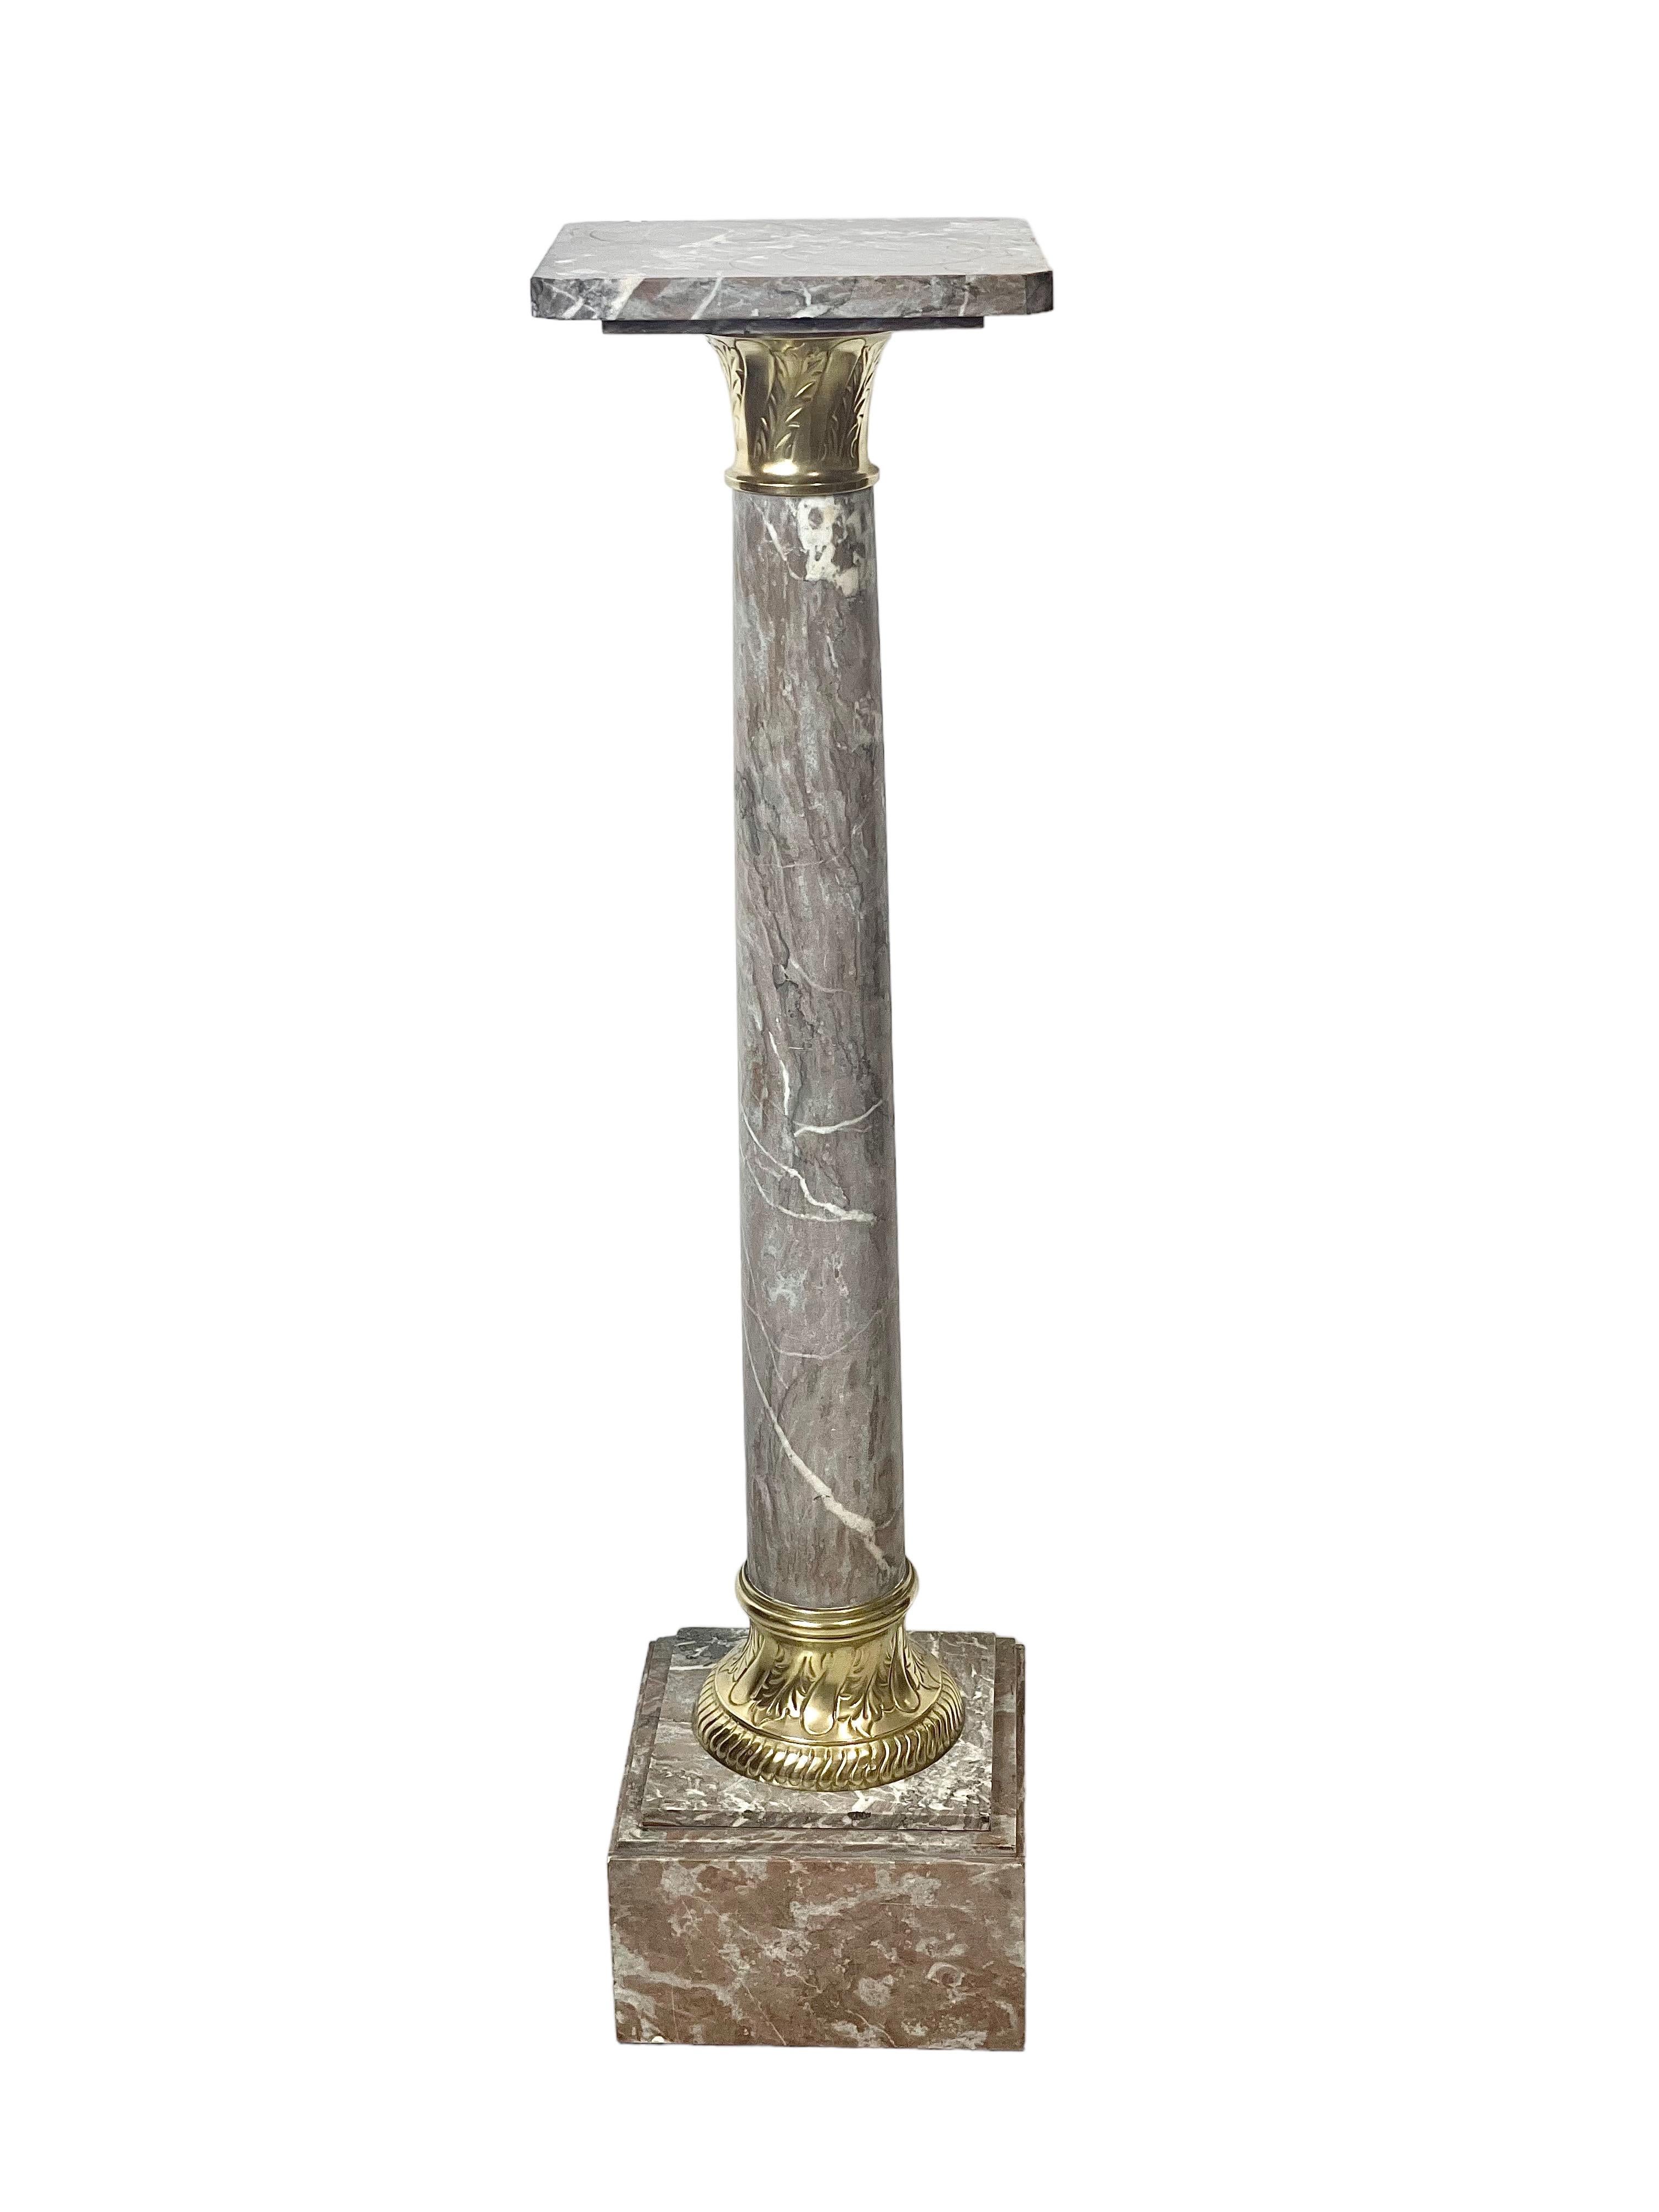 A wonderful gilt-bronze mounted pedestal, hand carved from beautiful grey-veined marble, and ideal for the display of a large and valued indoor plant or piece of sculpture. This decorative column features a square tray with chamfered corners resting